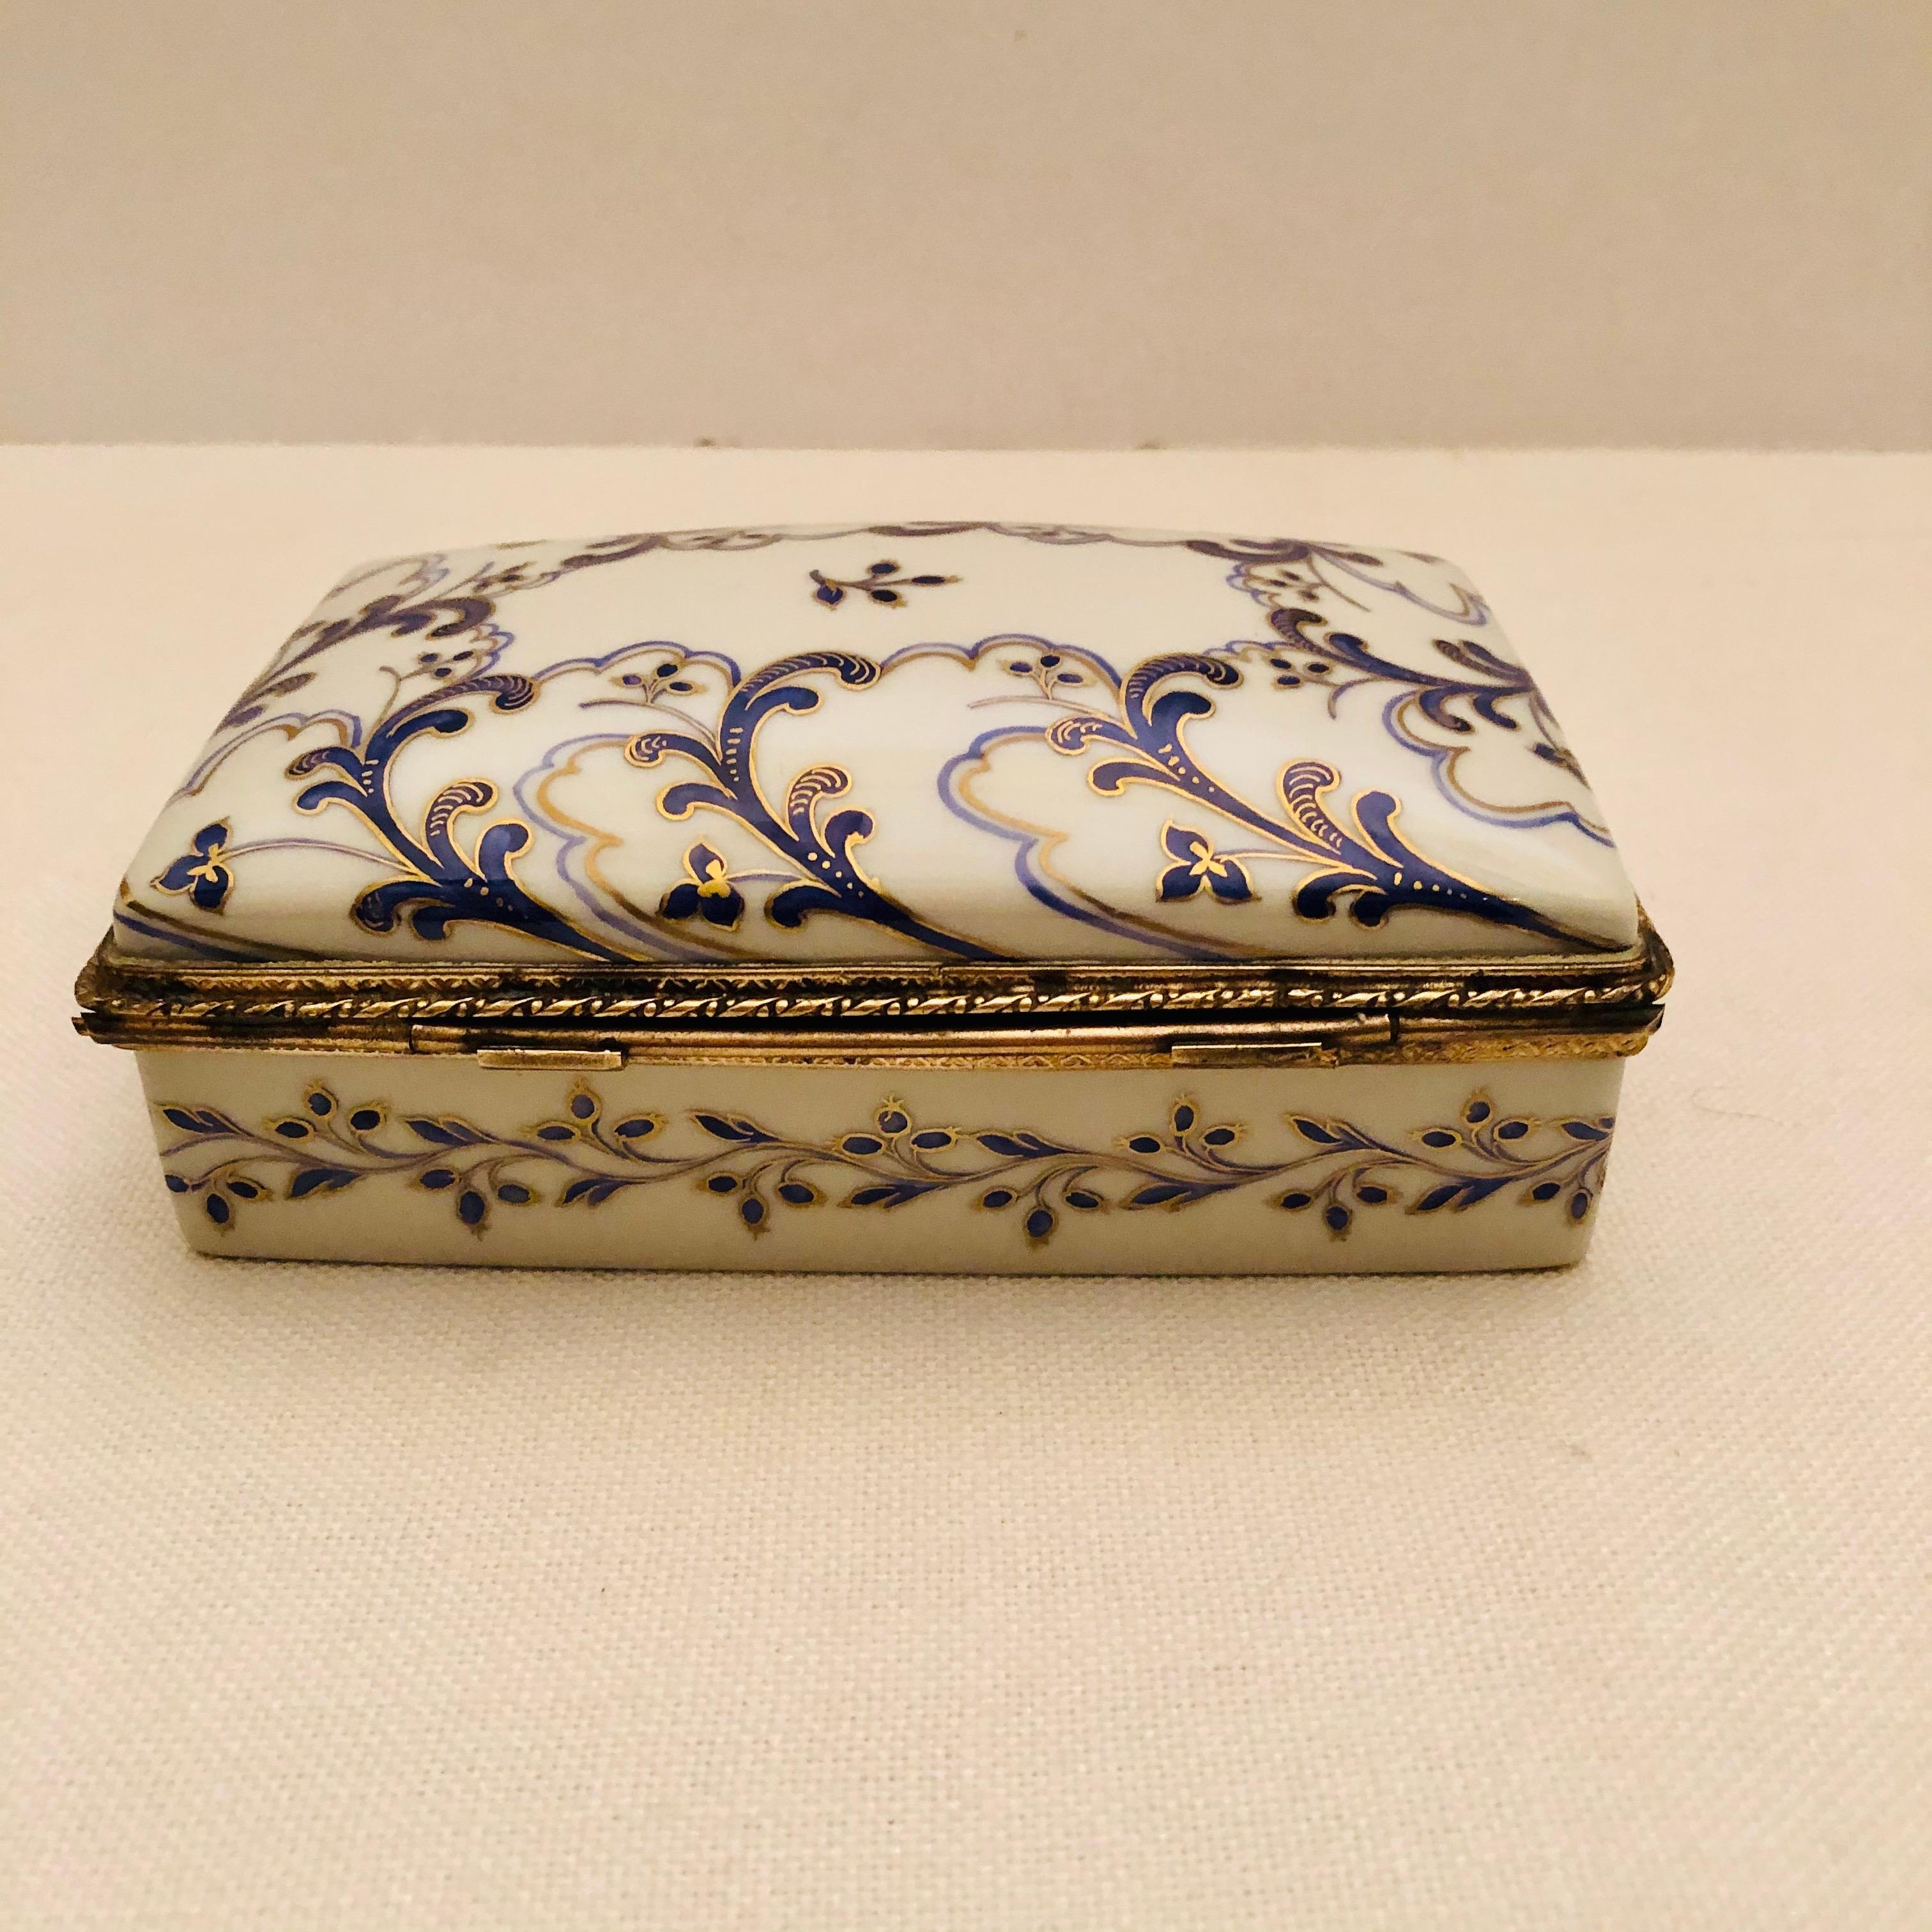 Le Tallec Porcelain Box with Hand-Painted Cobalt and Gold Arabesque Decoration 1